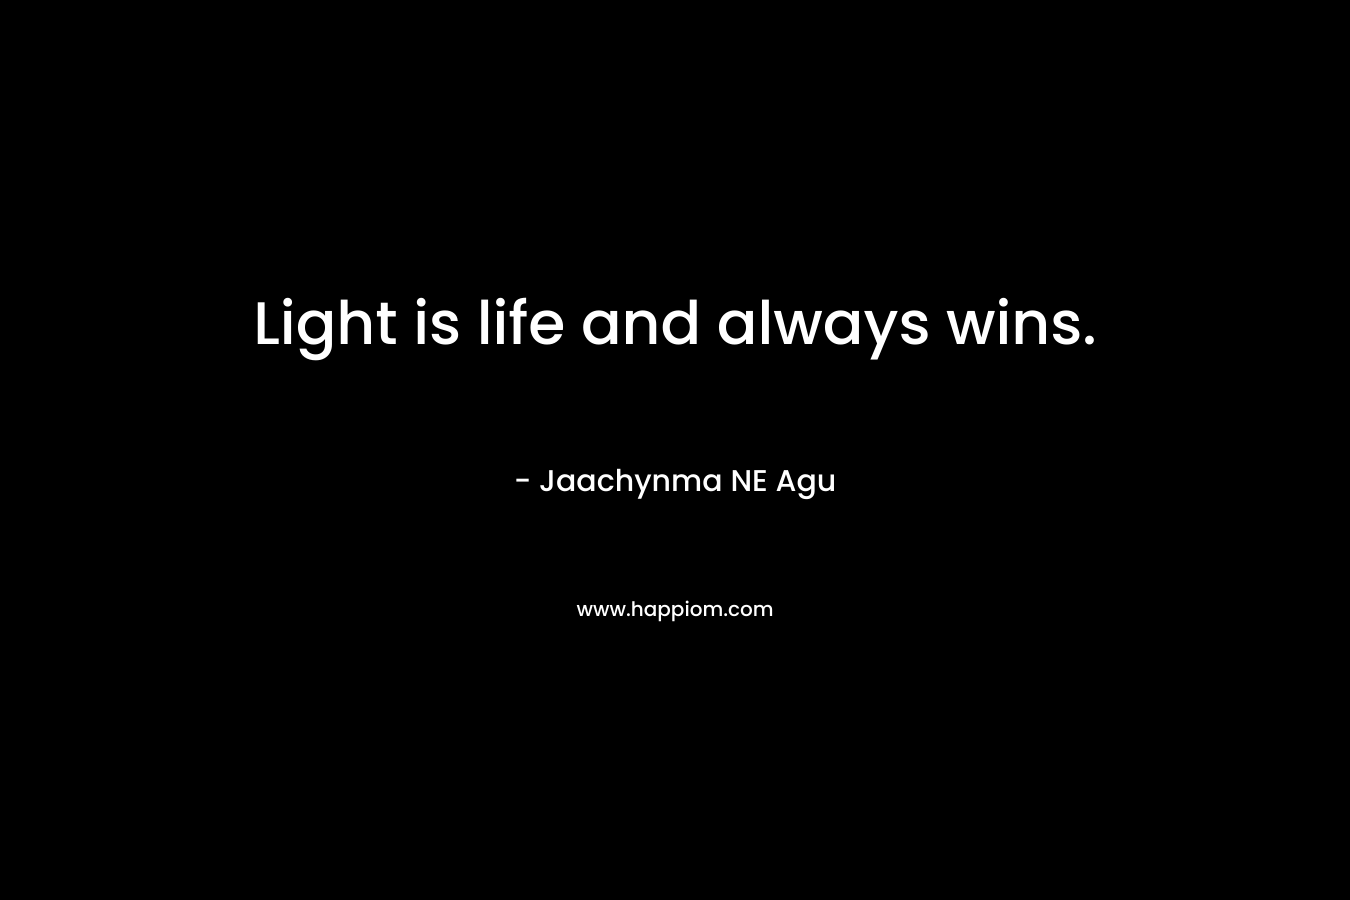 Light is life and always wins.